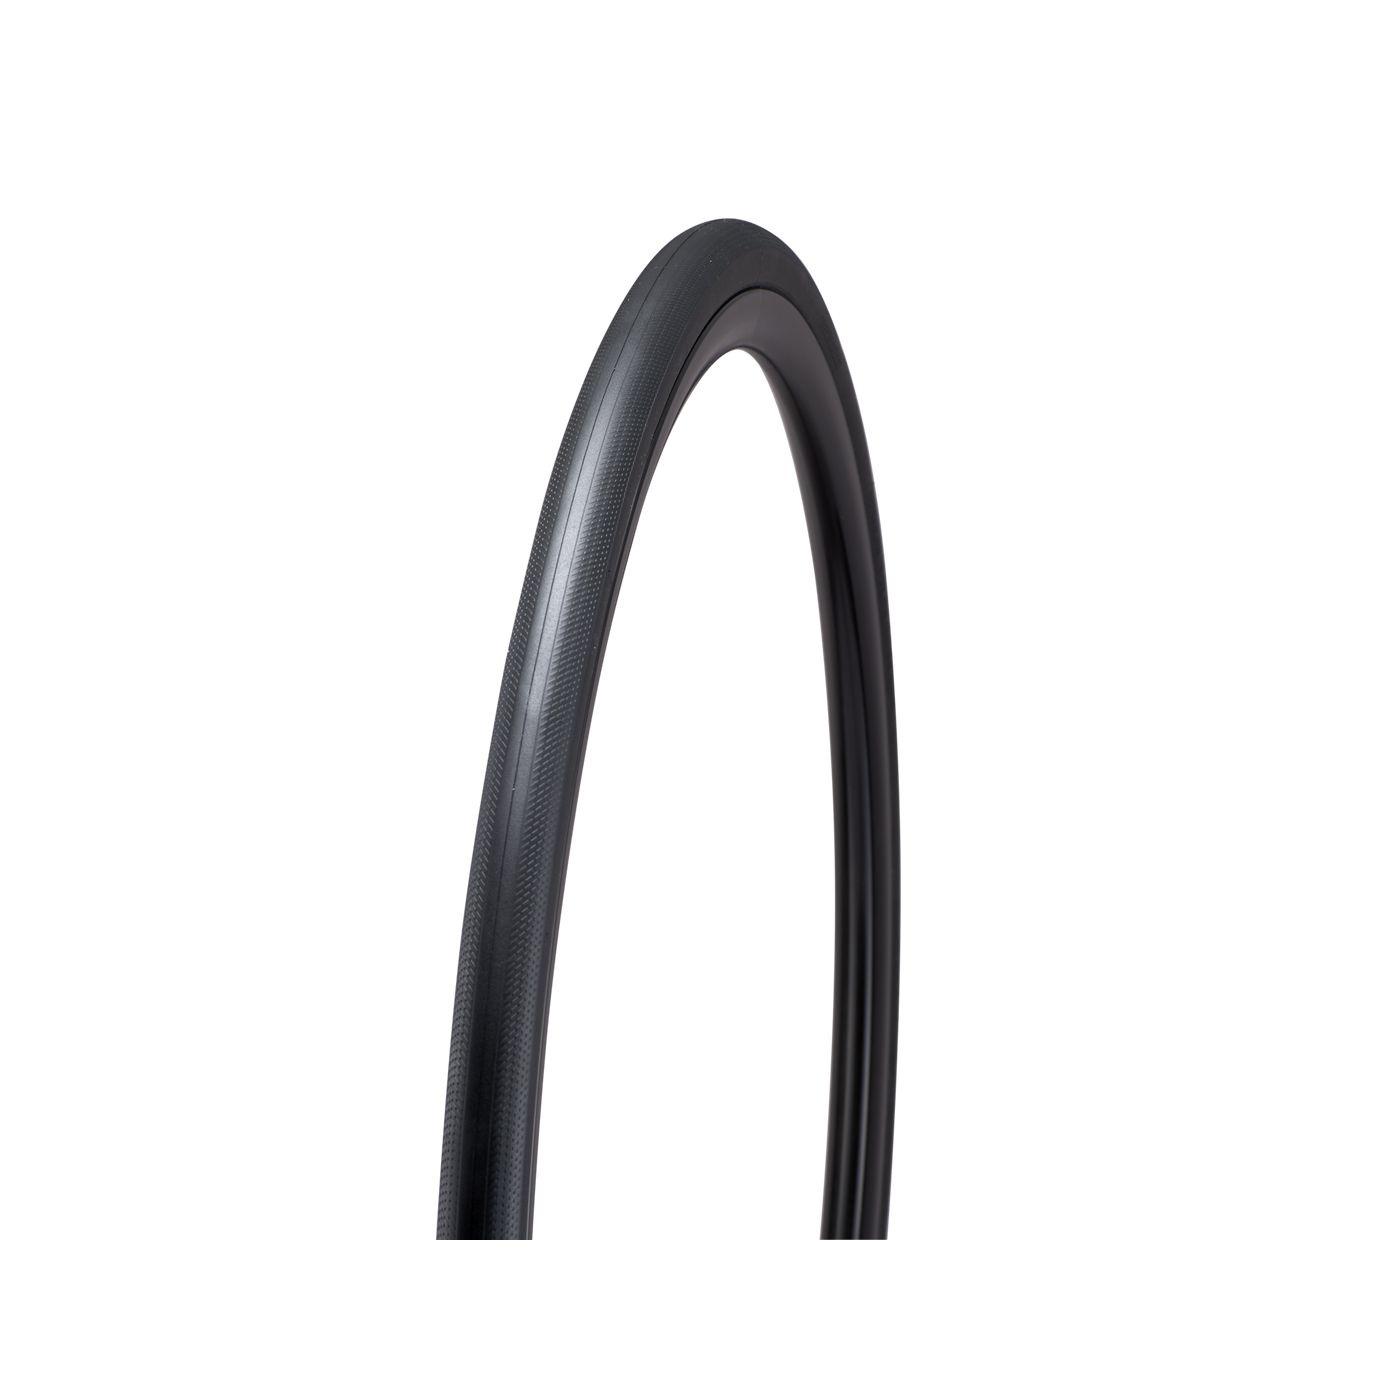 Specialized Turbo Pro T5 700c Road Bike Tire. – Bicycle Warehouse